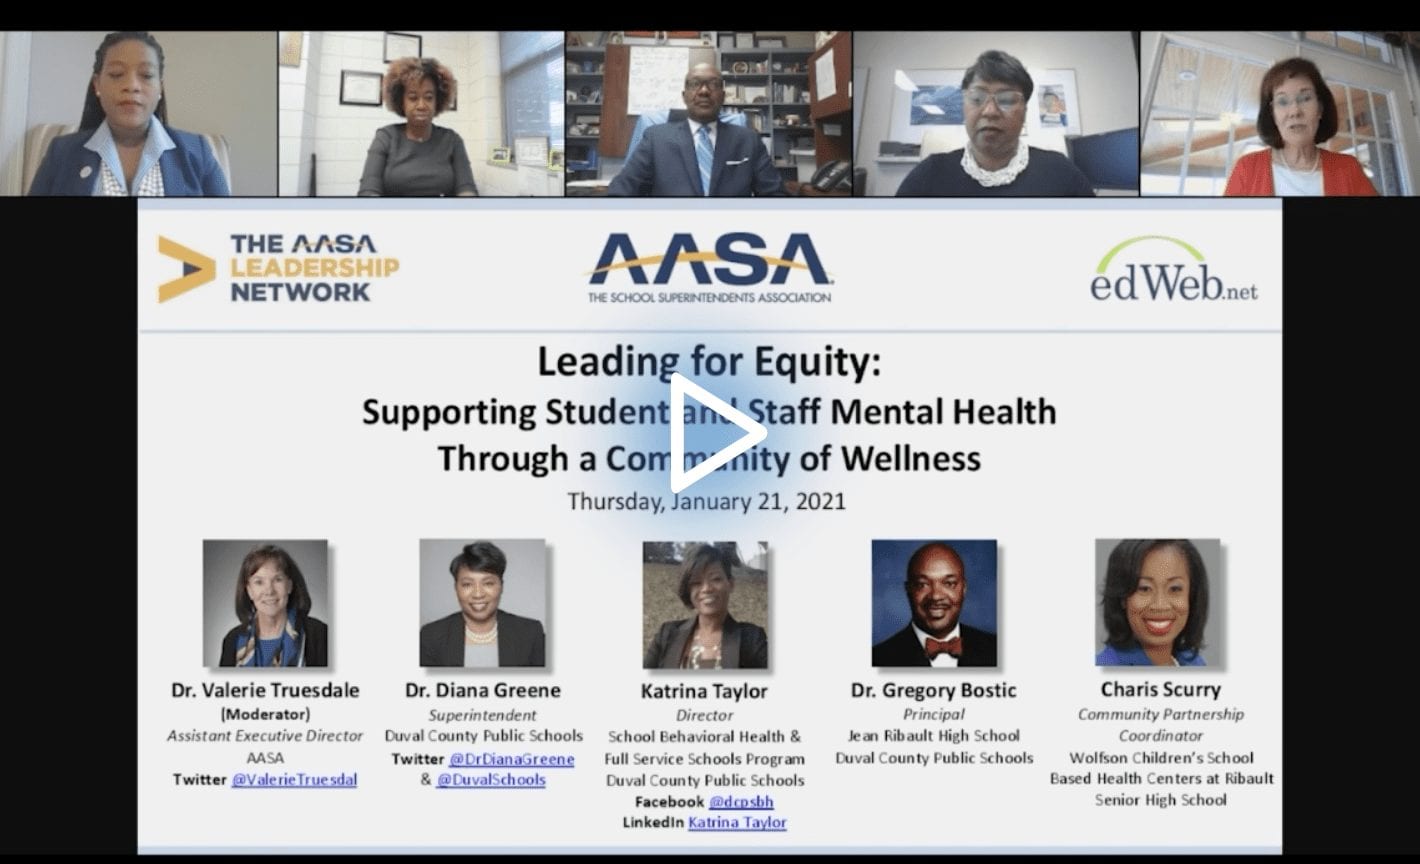 Leading for Equity: Supporting Student and Staff Mental Health Through a Community of Wellness edWebinar recording link